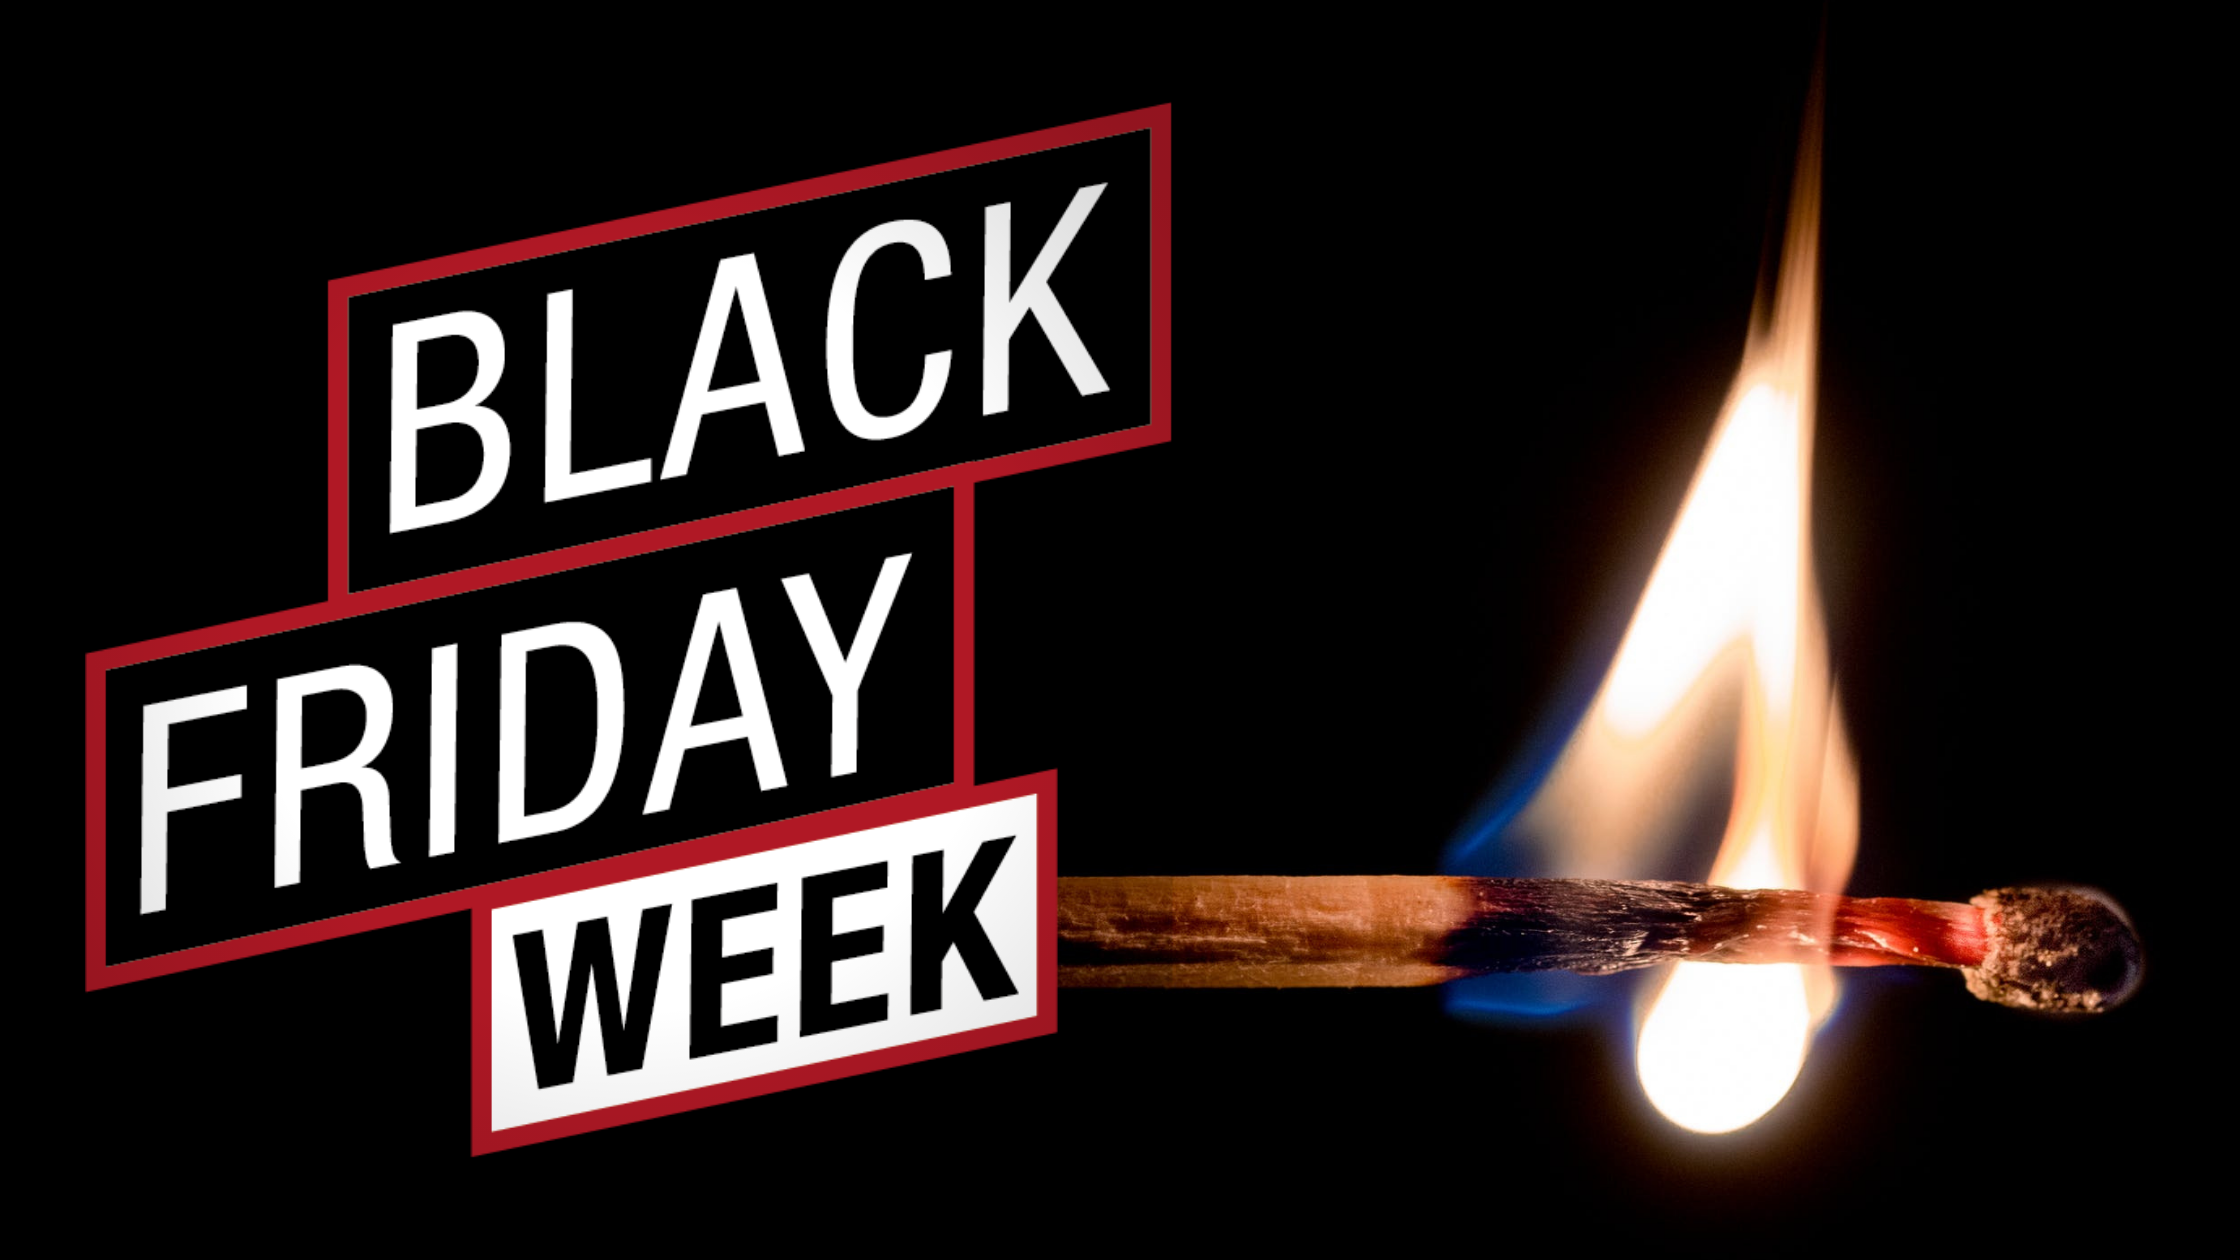 Black Friday is almost here at Firepit-online.com